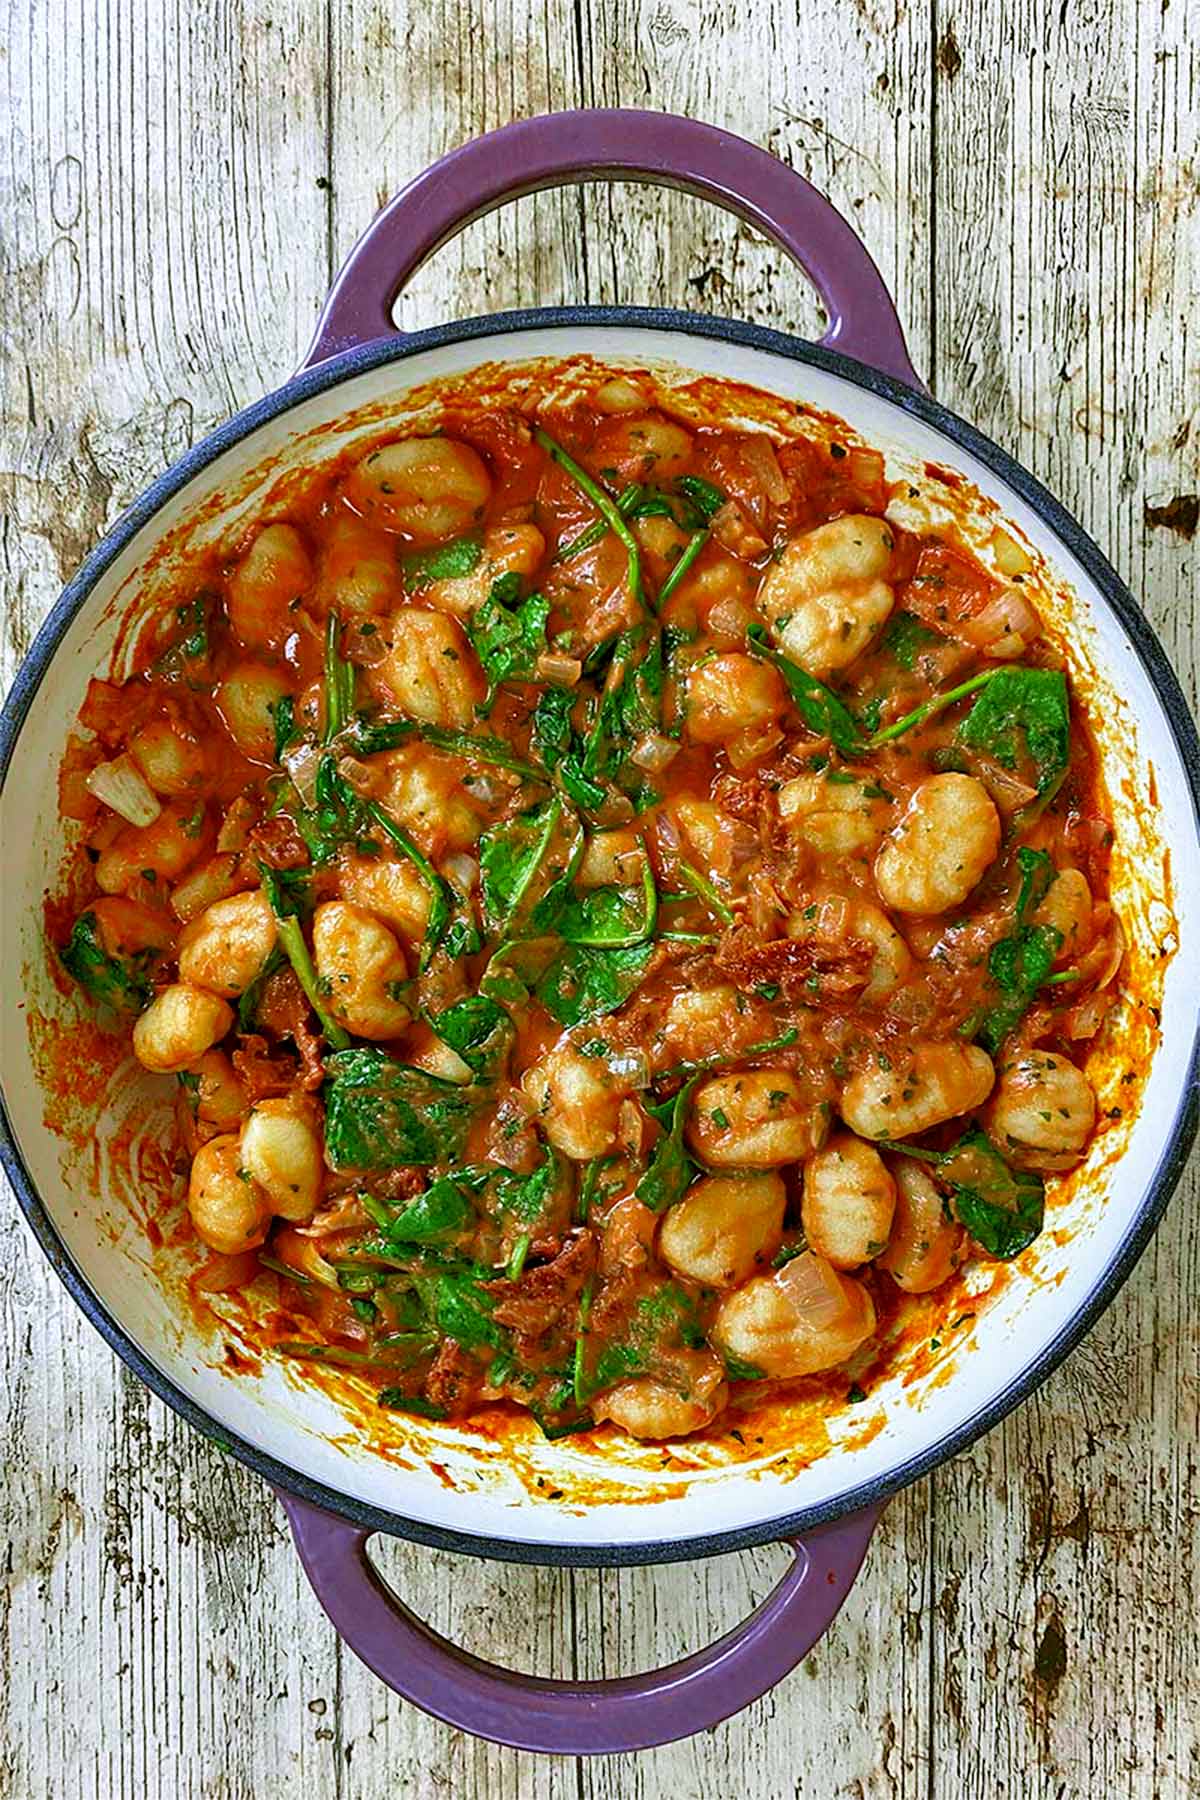 Gnocchi and spinach cooking in a creamy tomato sauce.